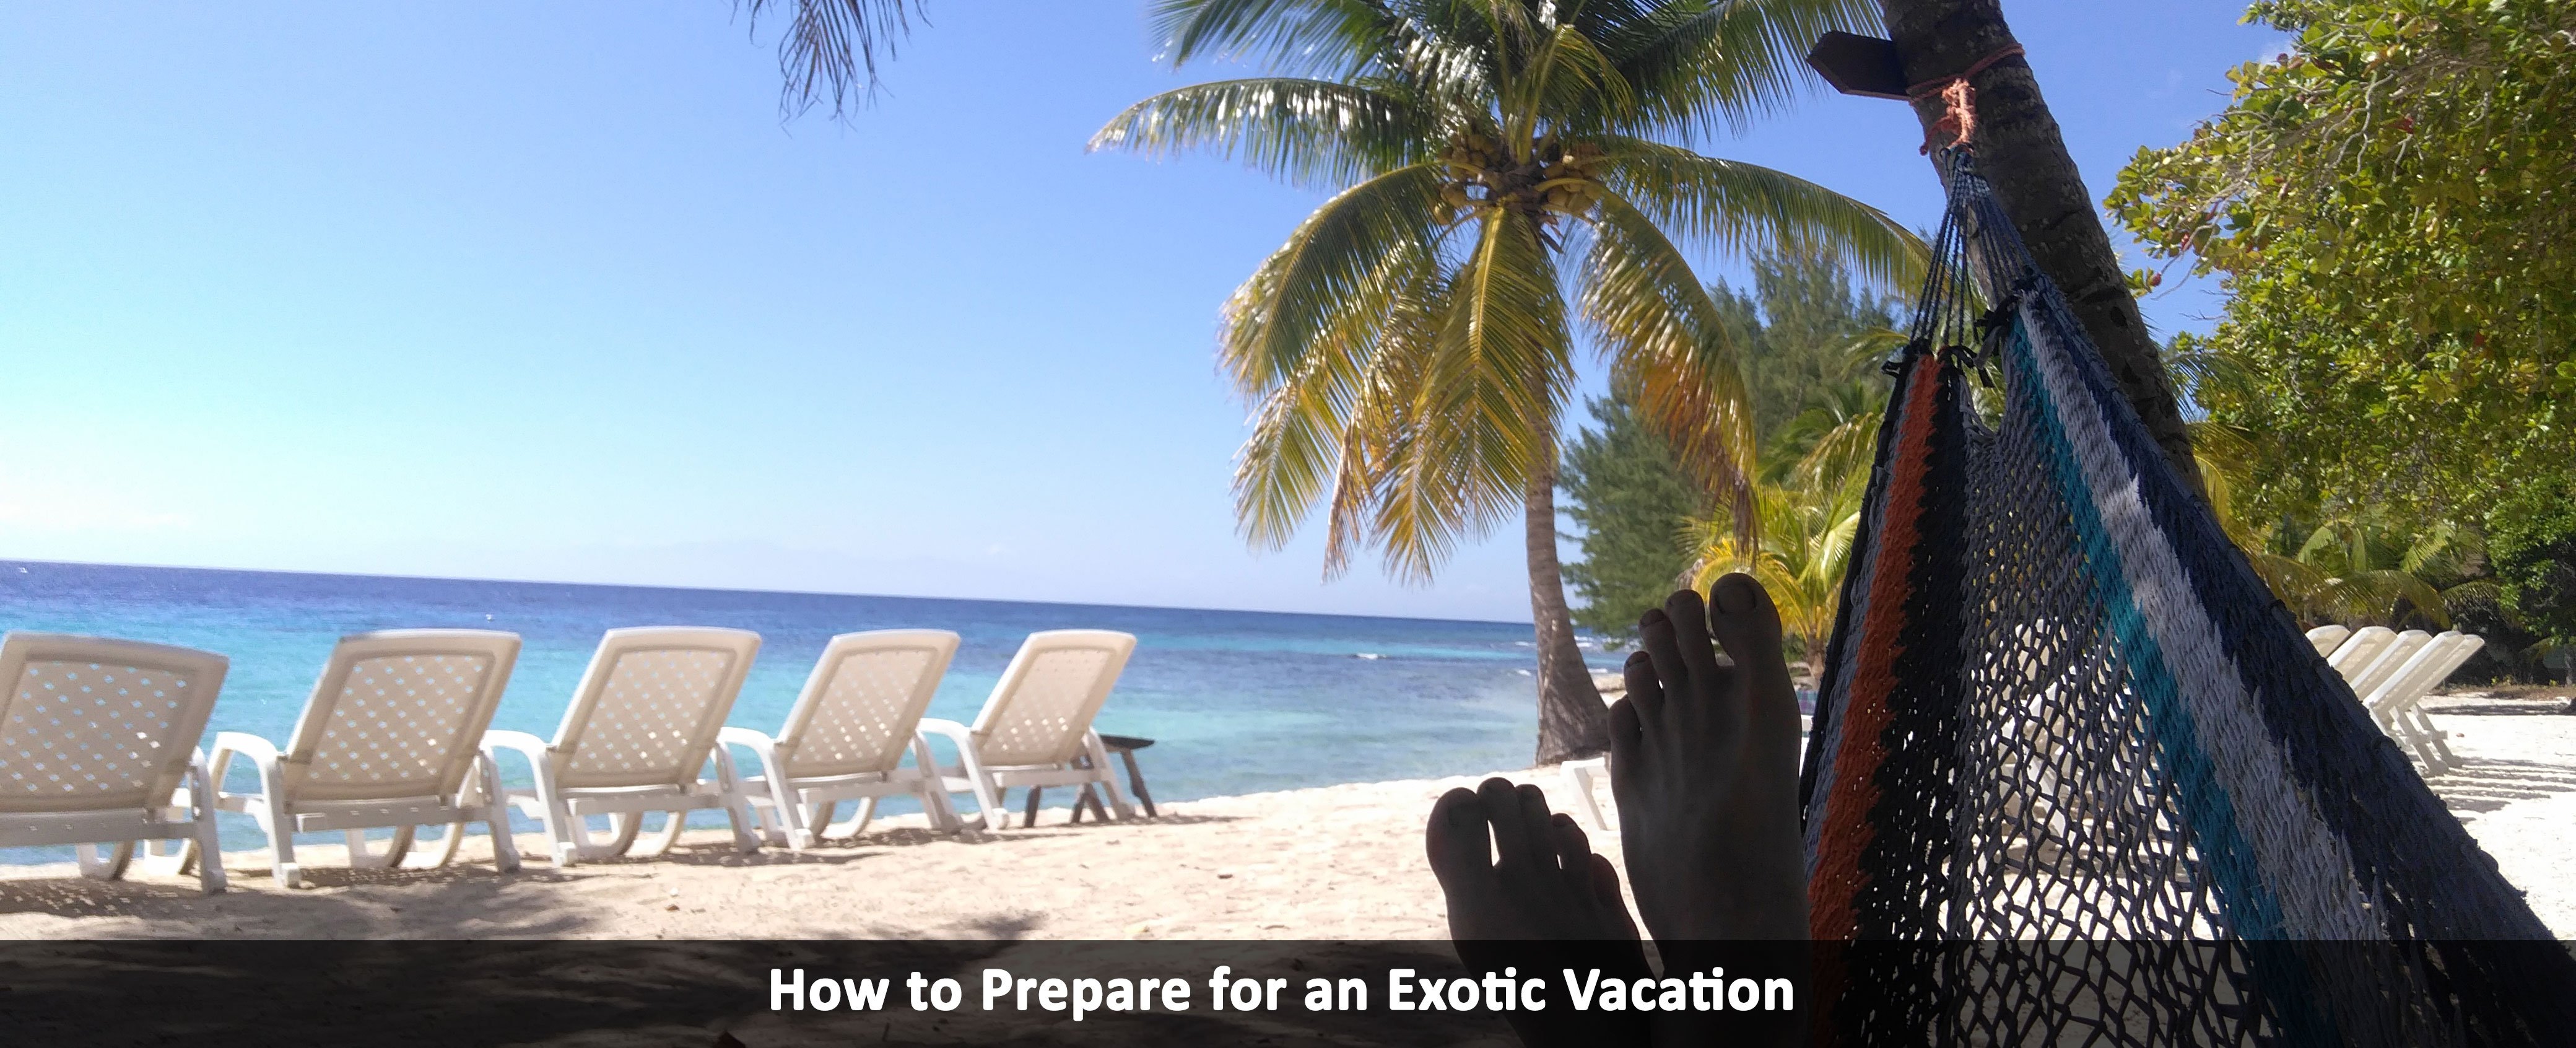 How to Prepare for an Exotic Vacation  Traveloni Vacations